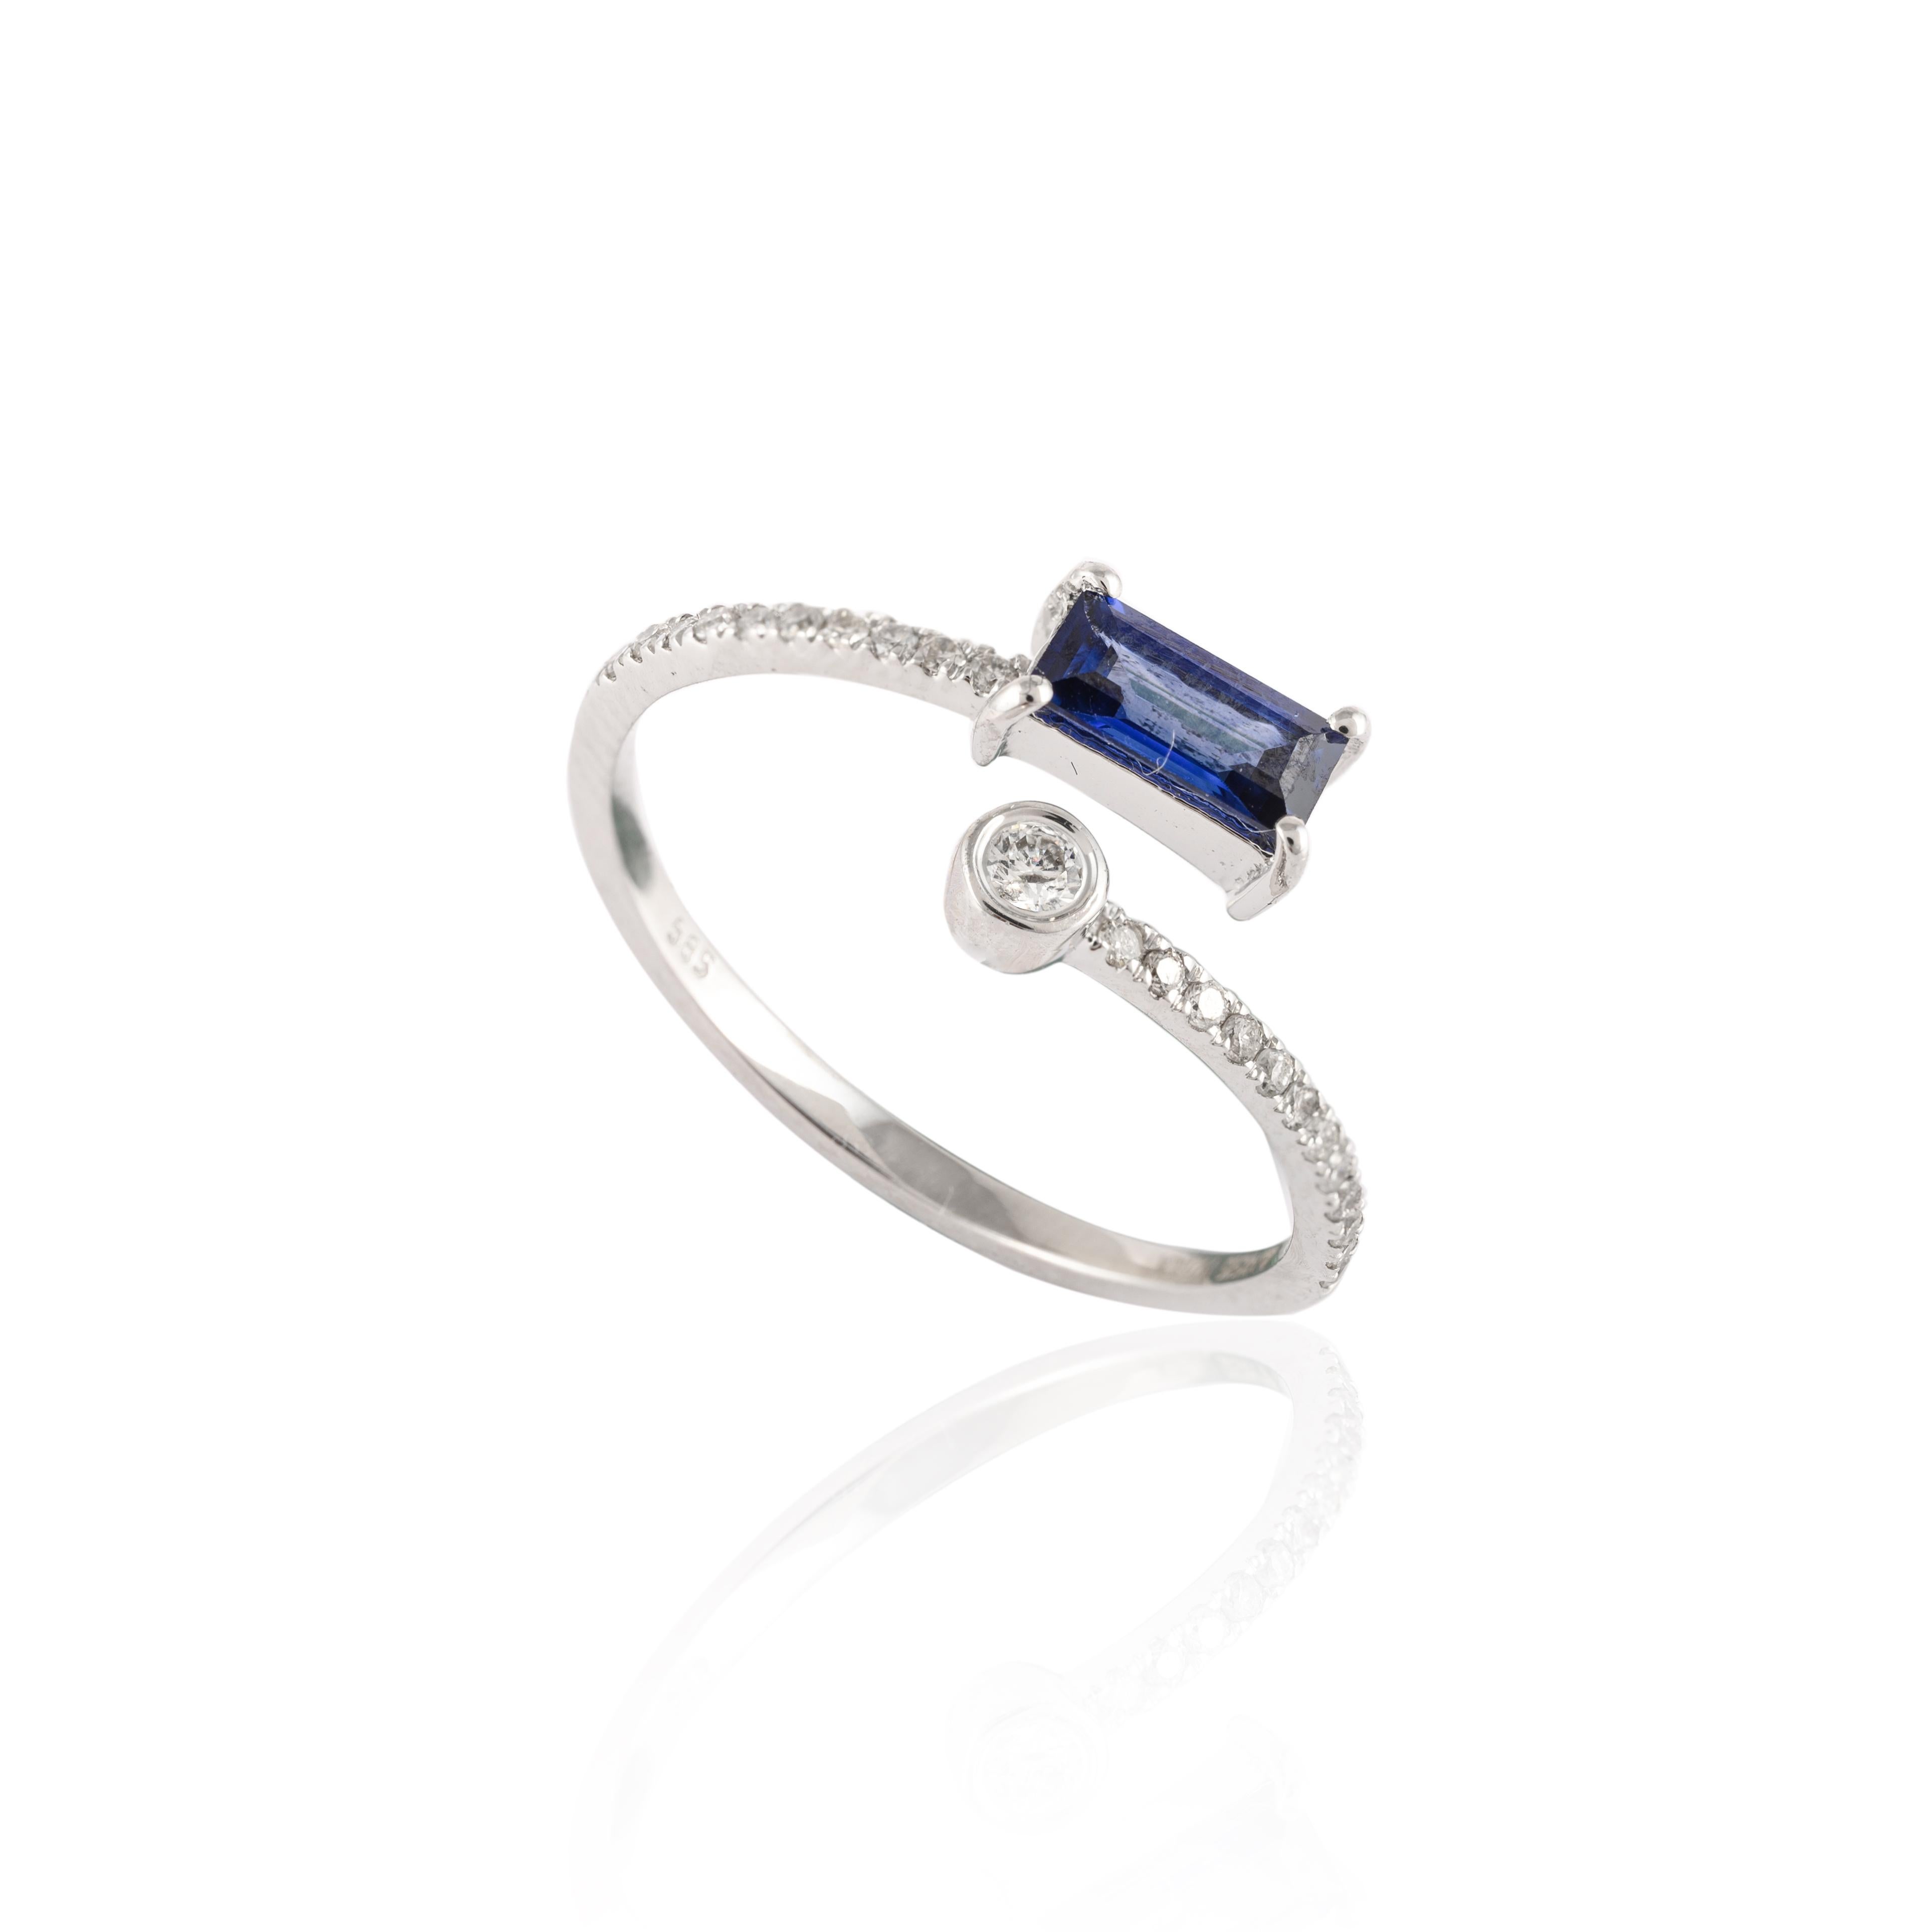 For Sale:  14k Solid White Gold Minimalist Open Ring with Blue Sapphire and Diamonds 9